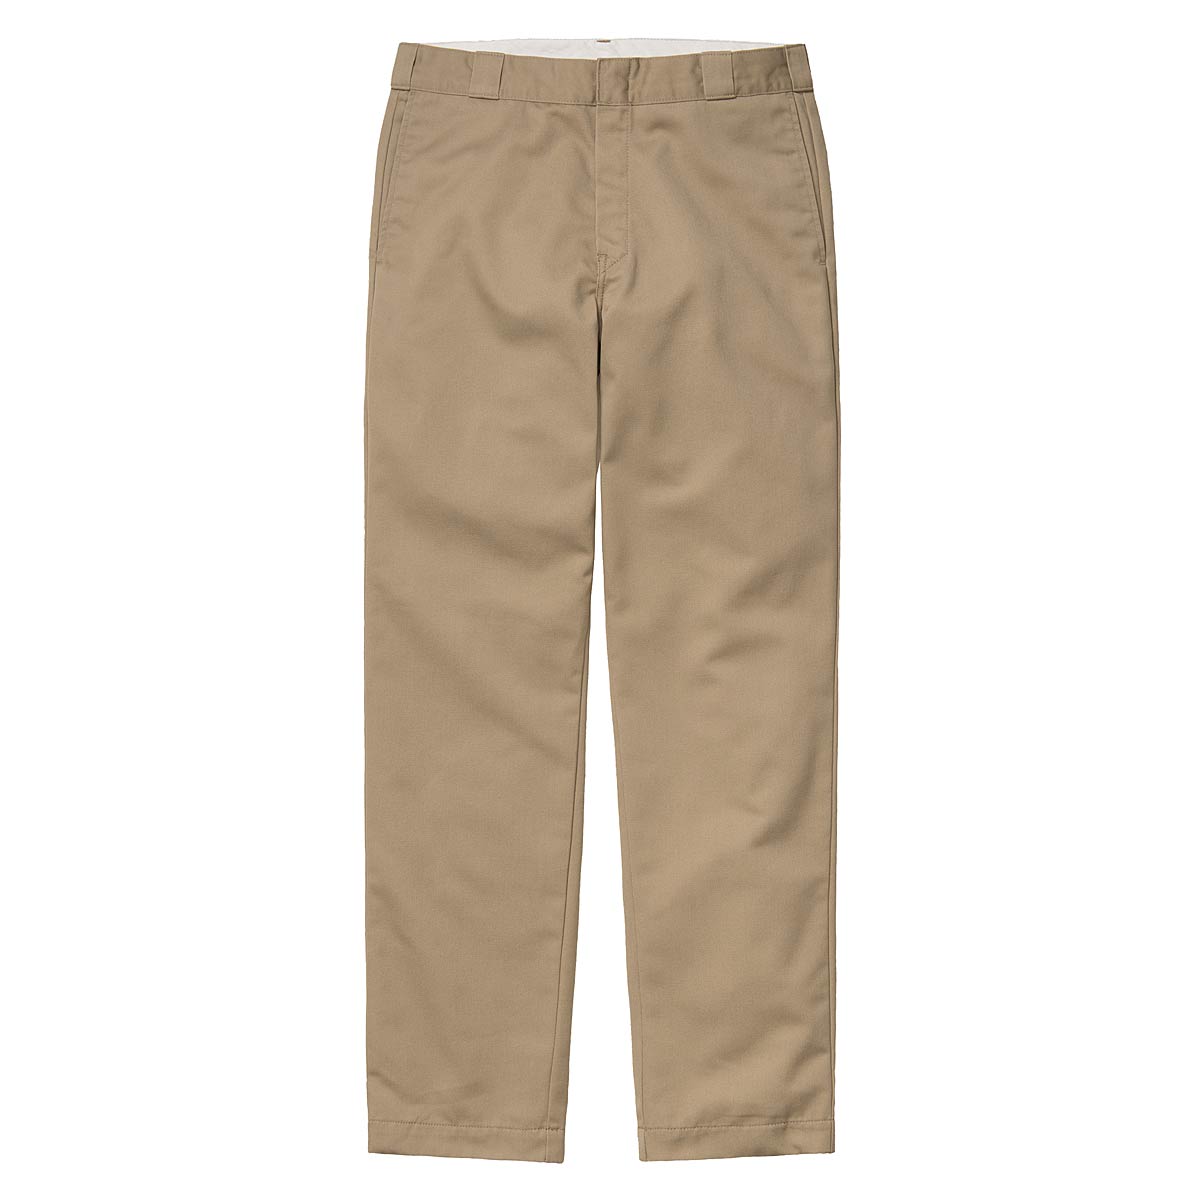 Carhartt Wip Master Pants, Leather 31/32